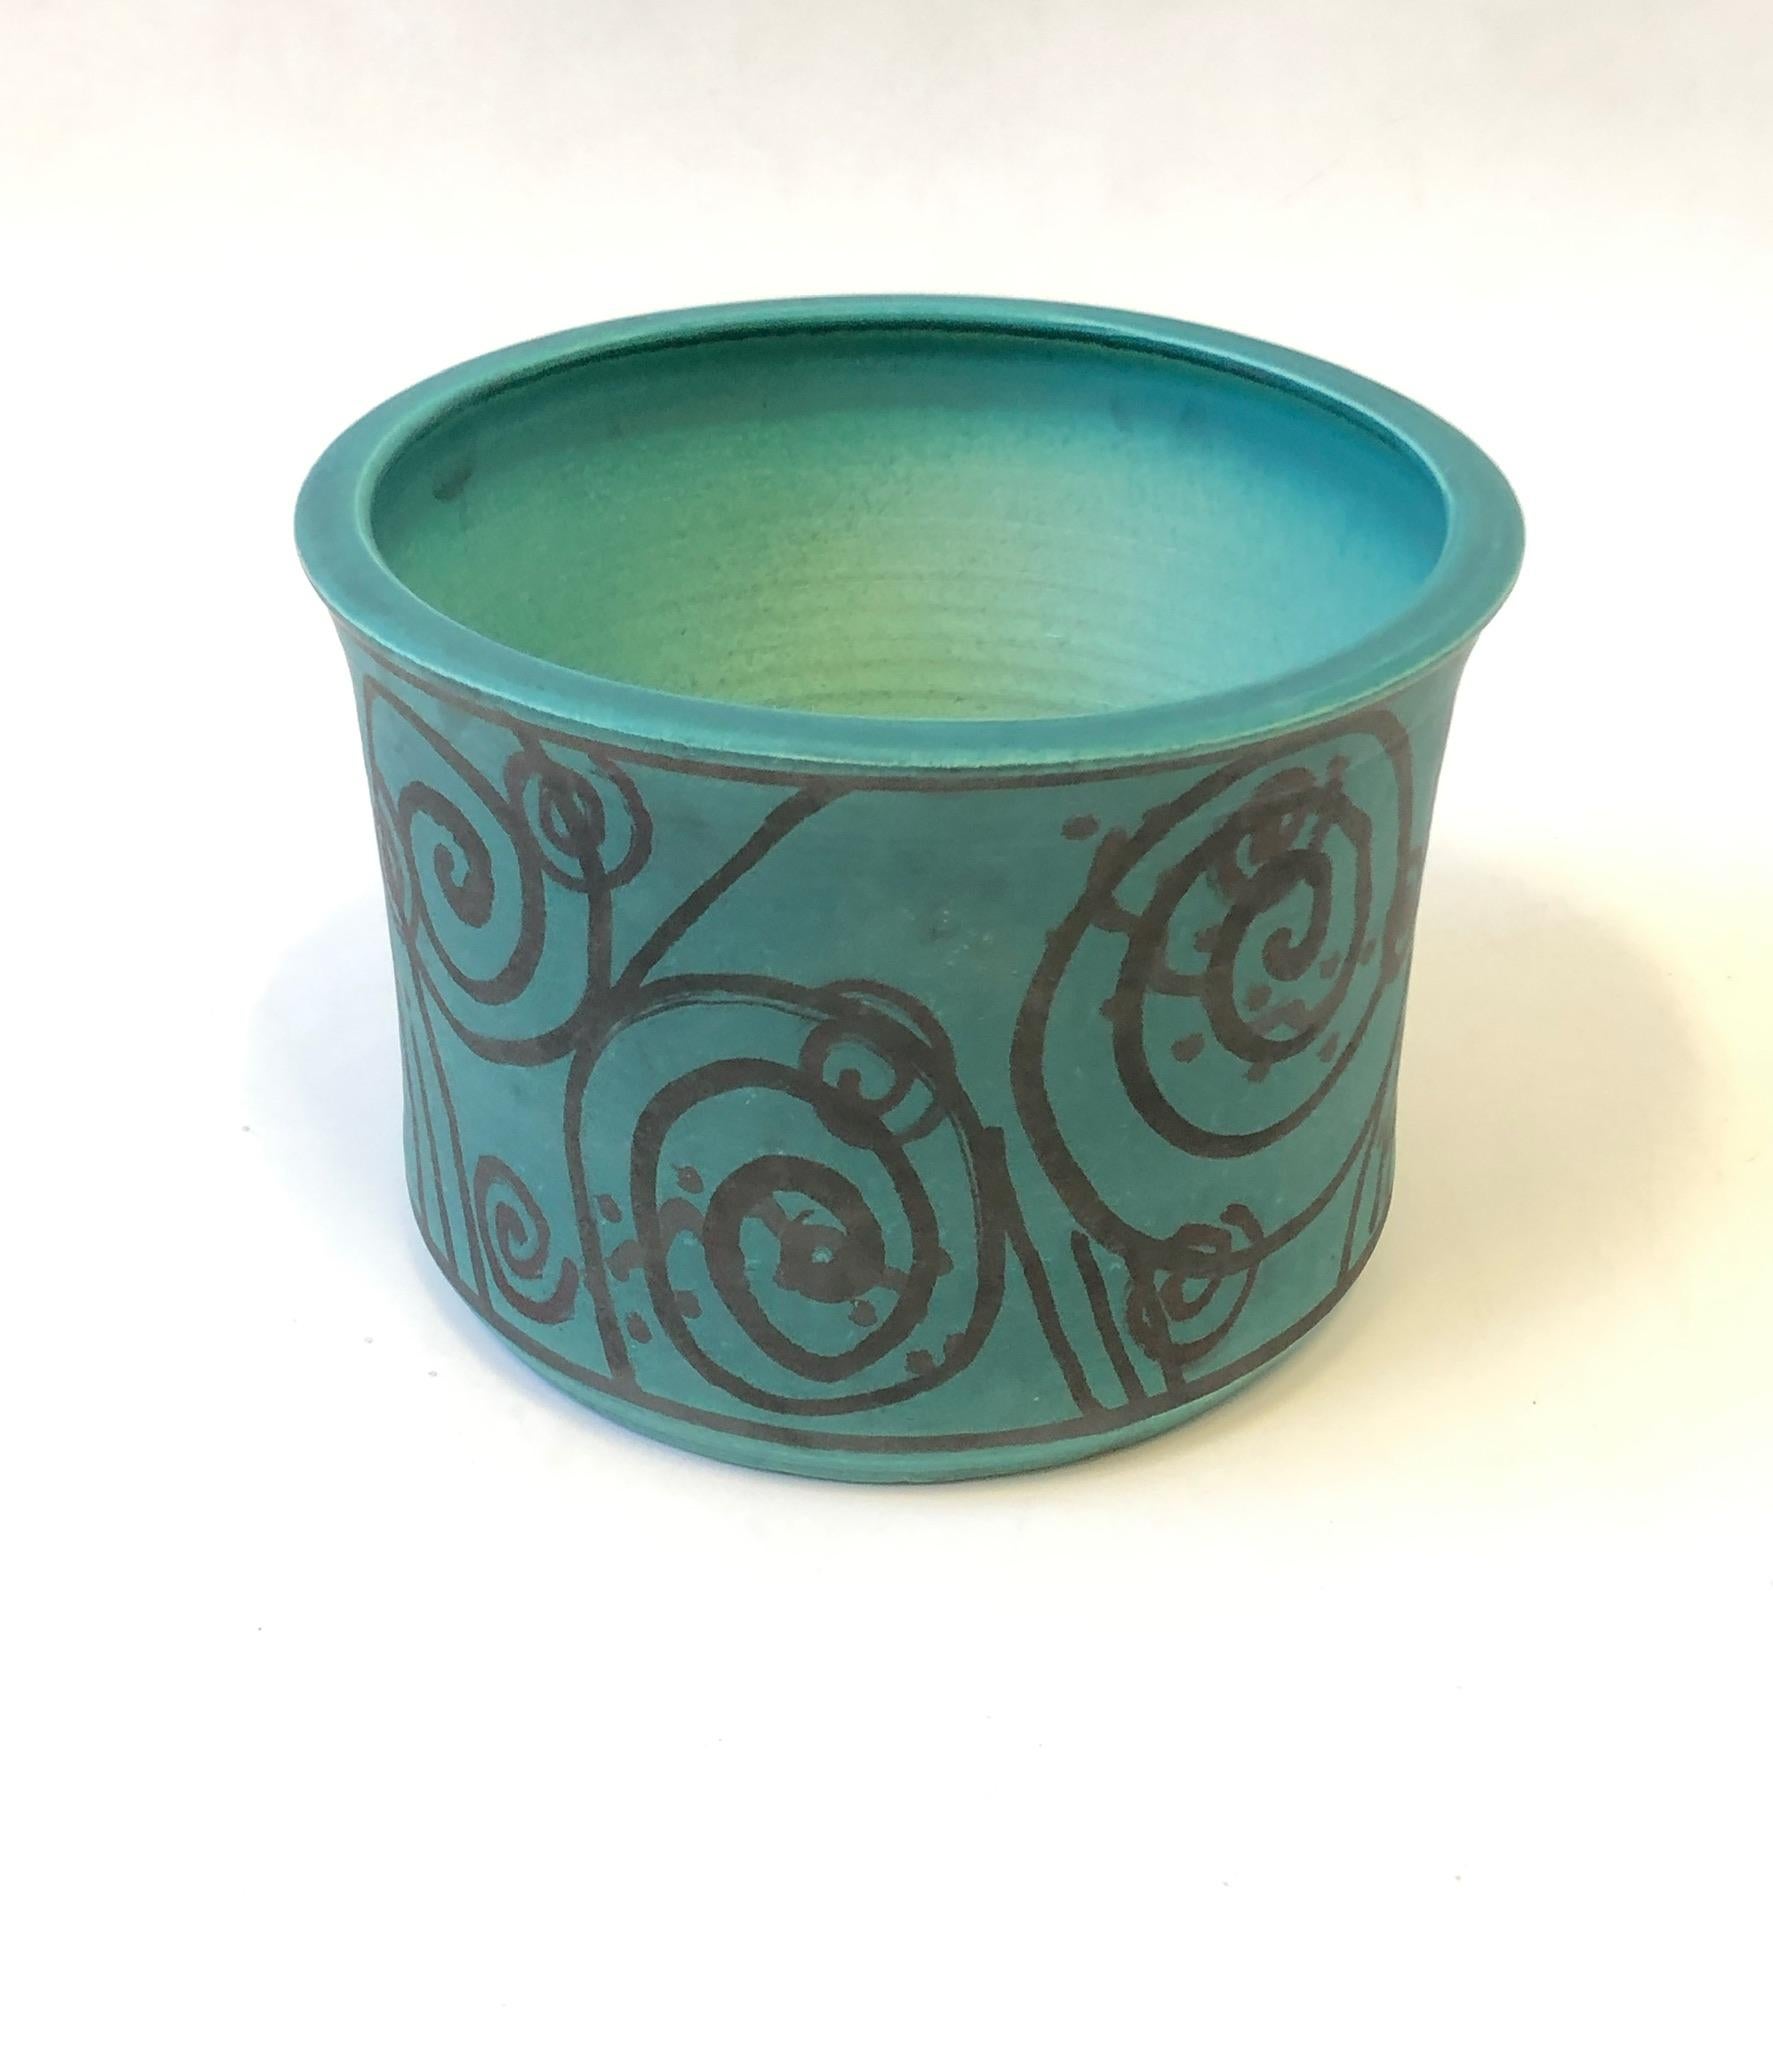 A beautiful emerald green studio ceramic planter by Gary McCloy for Steve Chase. The planter has a matted glazed with black abstract design. Hand signed and marked exclusively for Steve Chase( see detail photos). 

Measurements: 7.5/8” high 11”